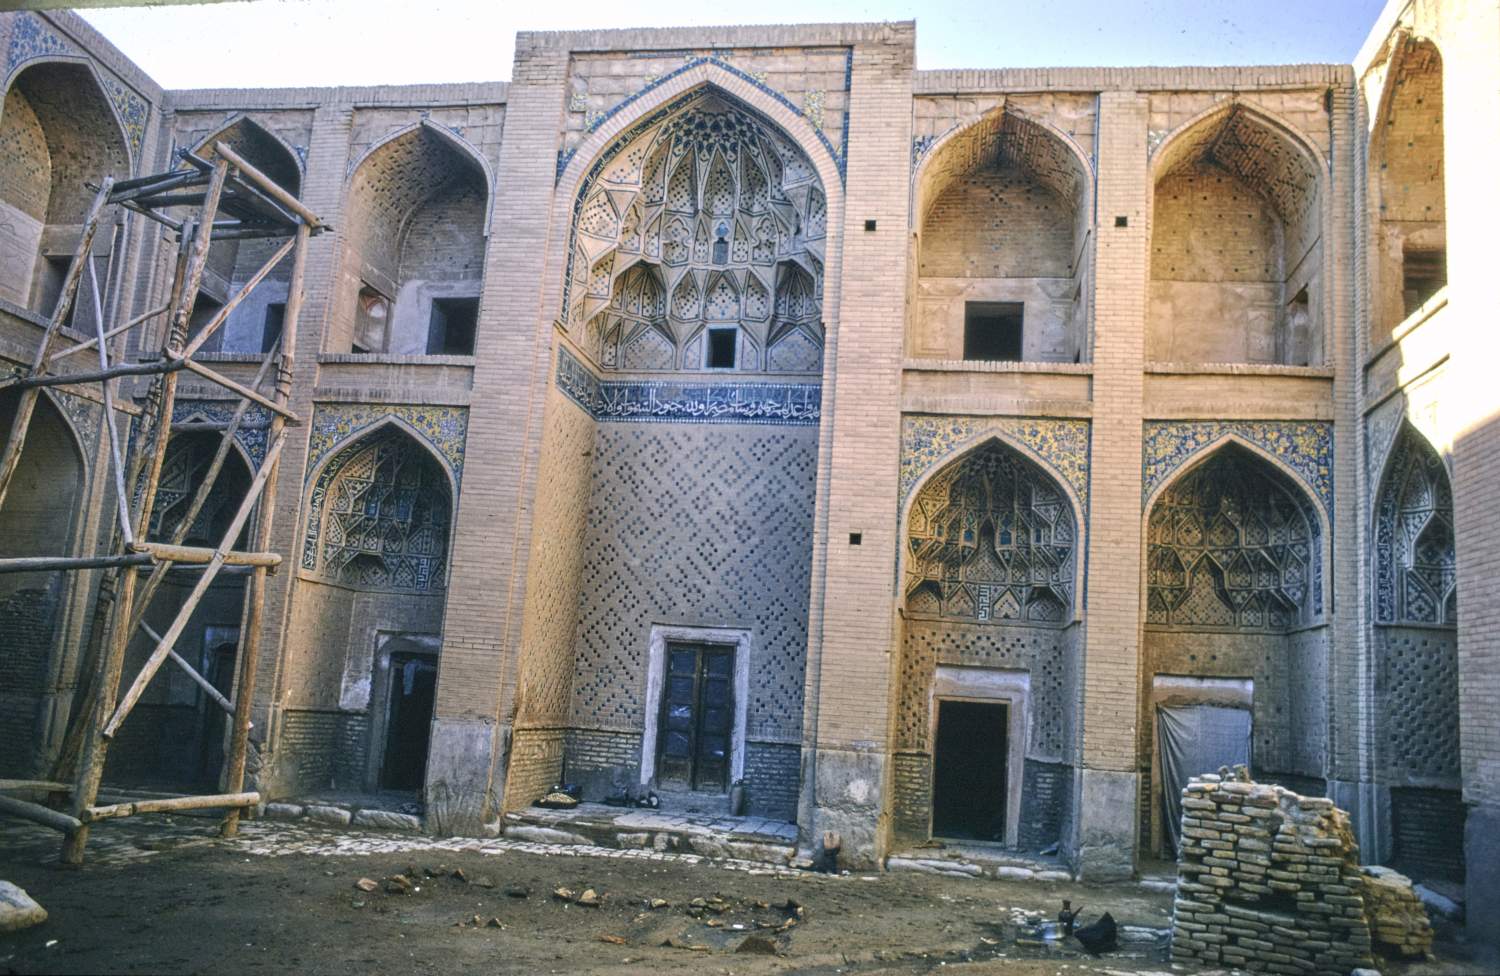 View of west facade of courtyard, showing western iwan and adjacent arcades.